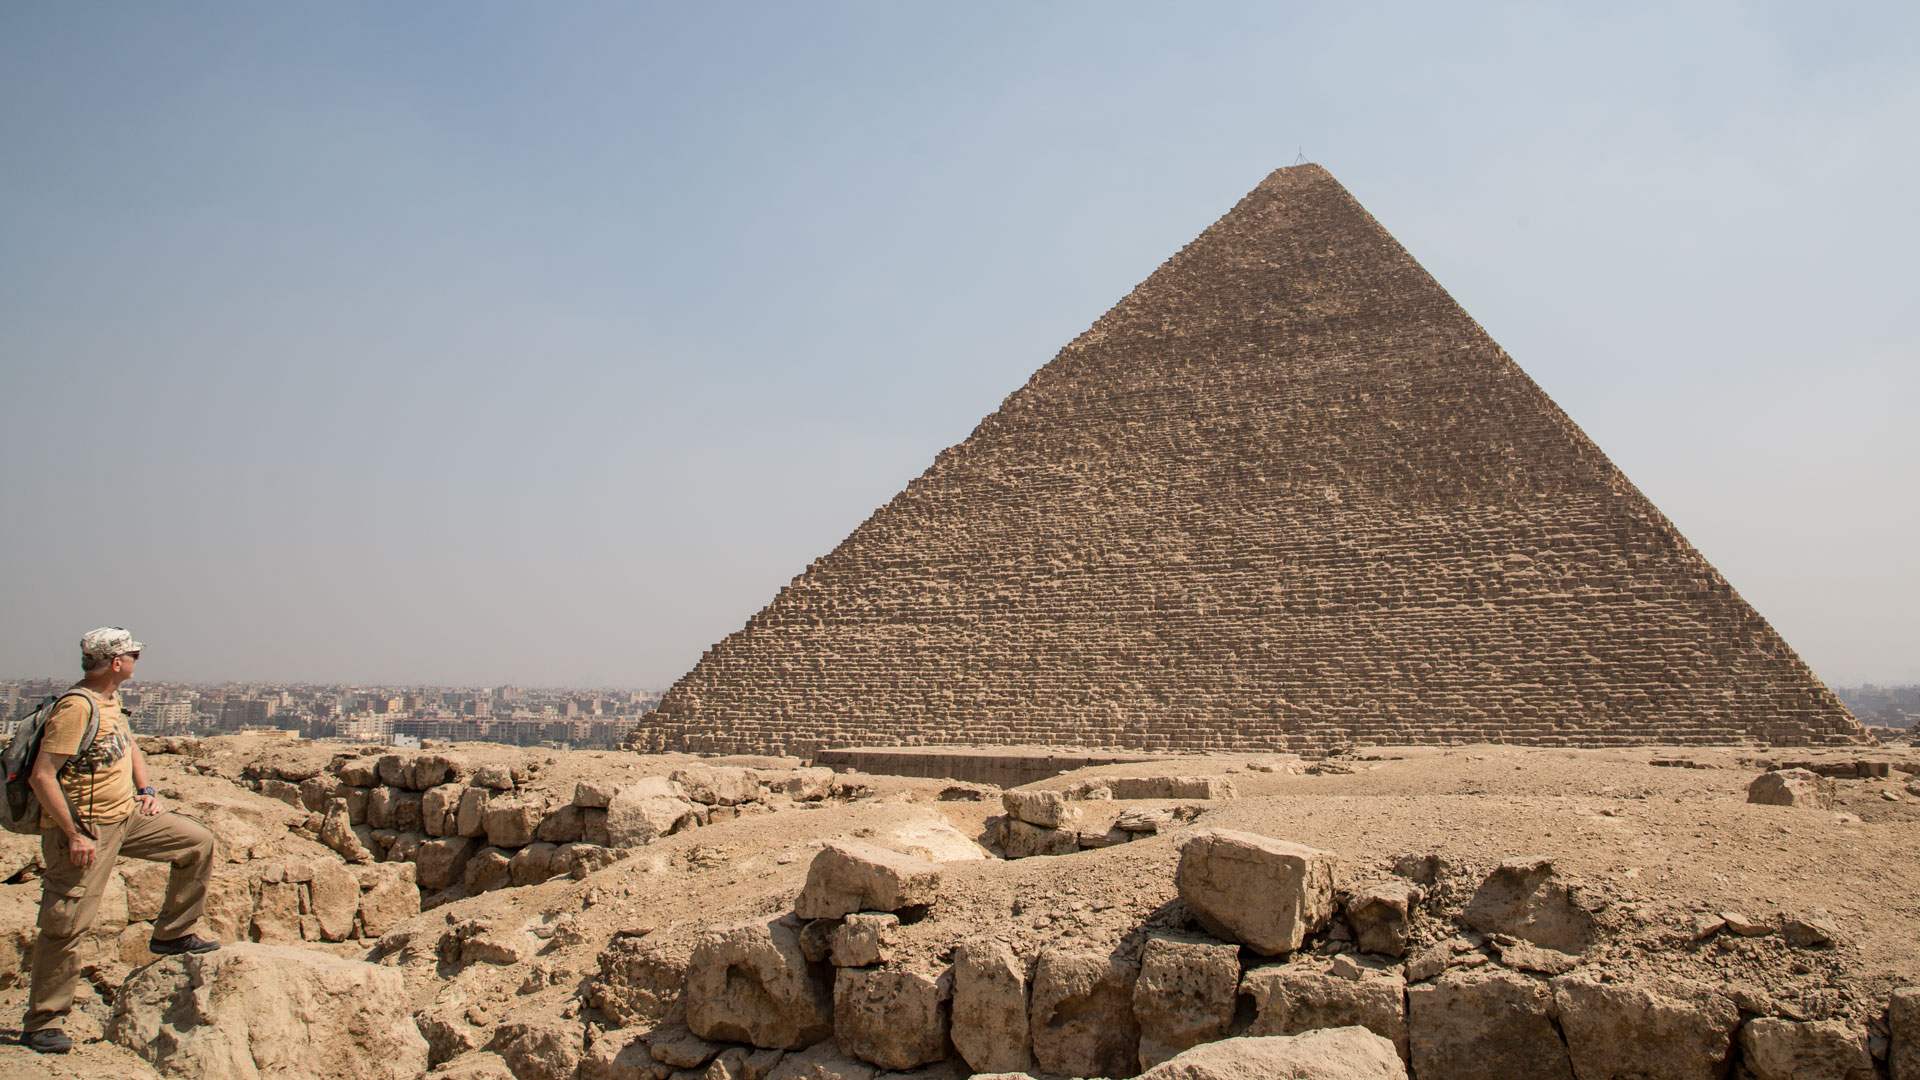 Does the Great Pyramid date from antediluvian times?